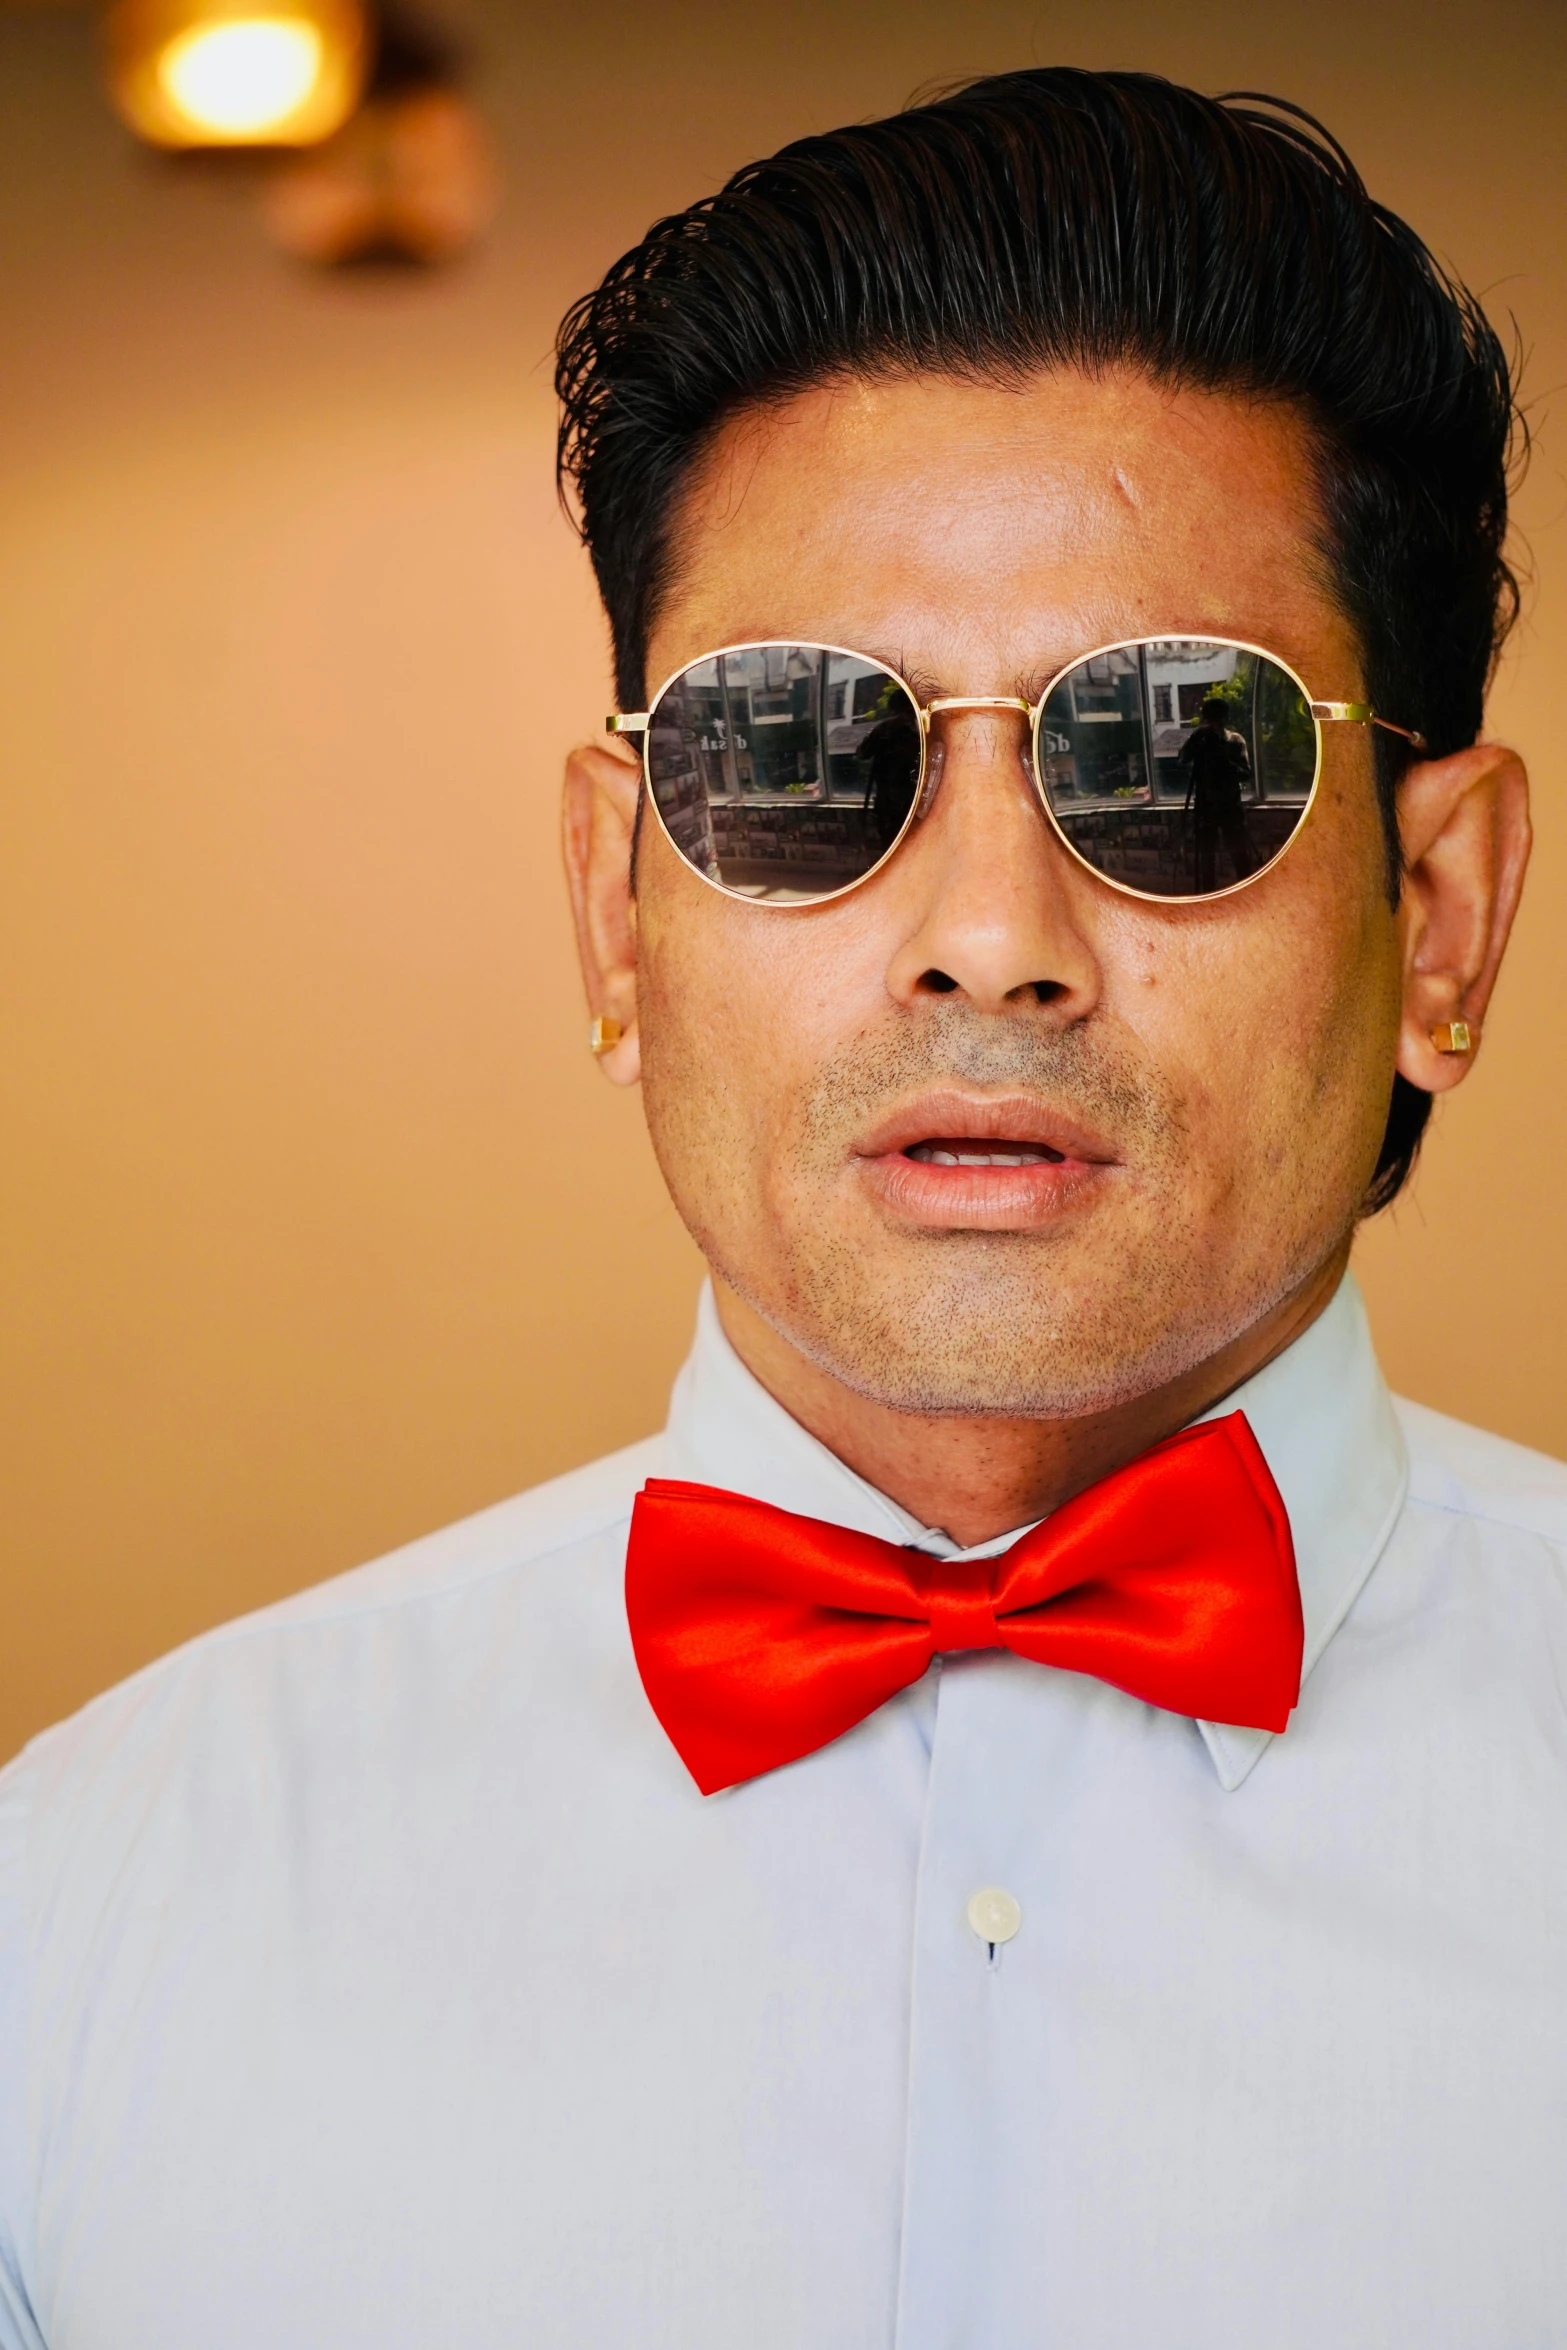 man with sunglasses on a white shirt wearing red bow tie